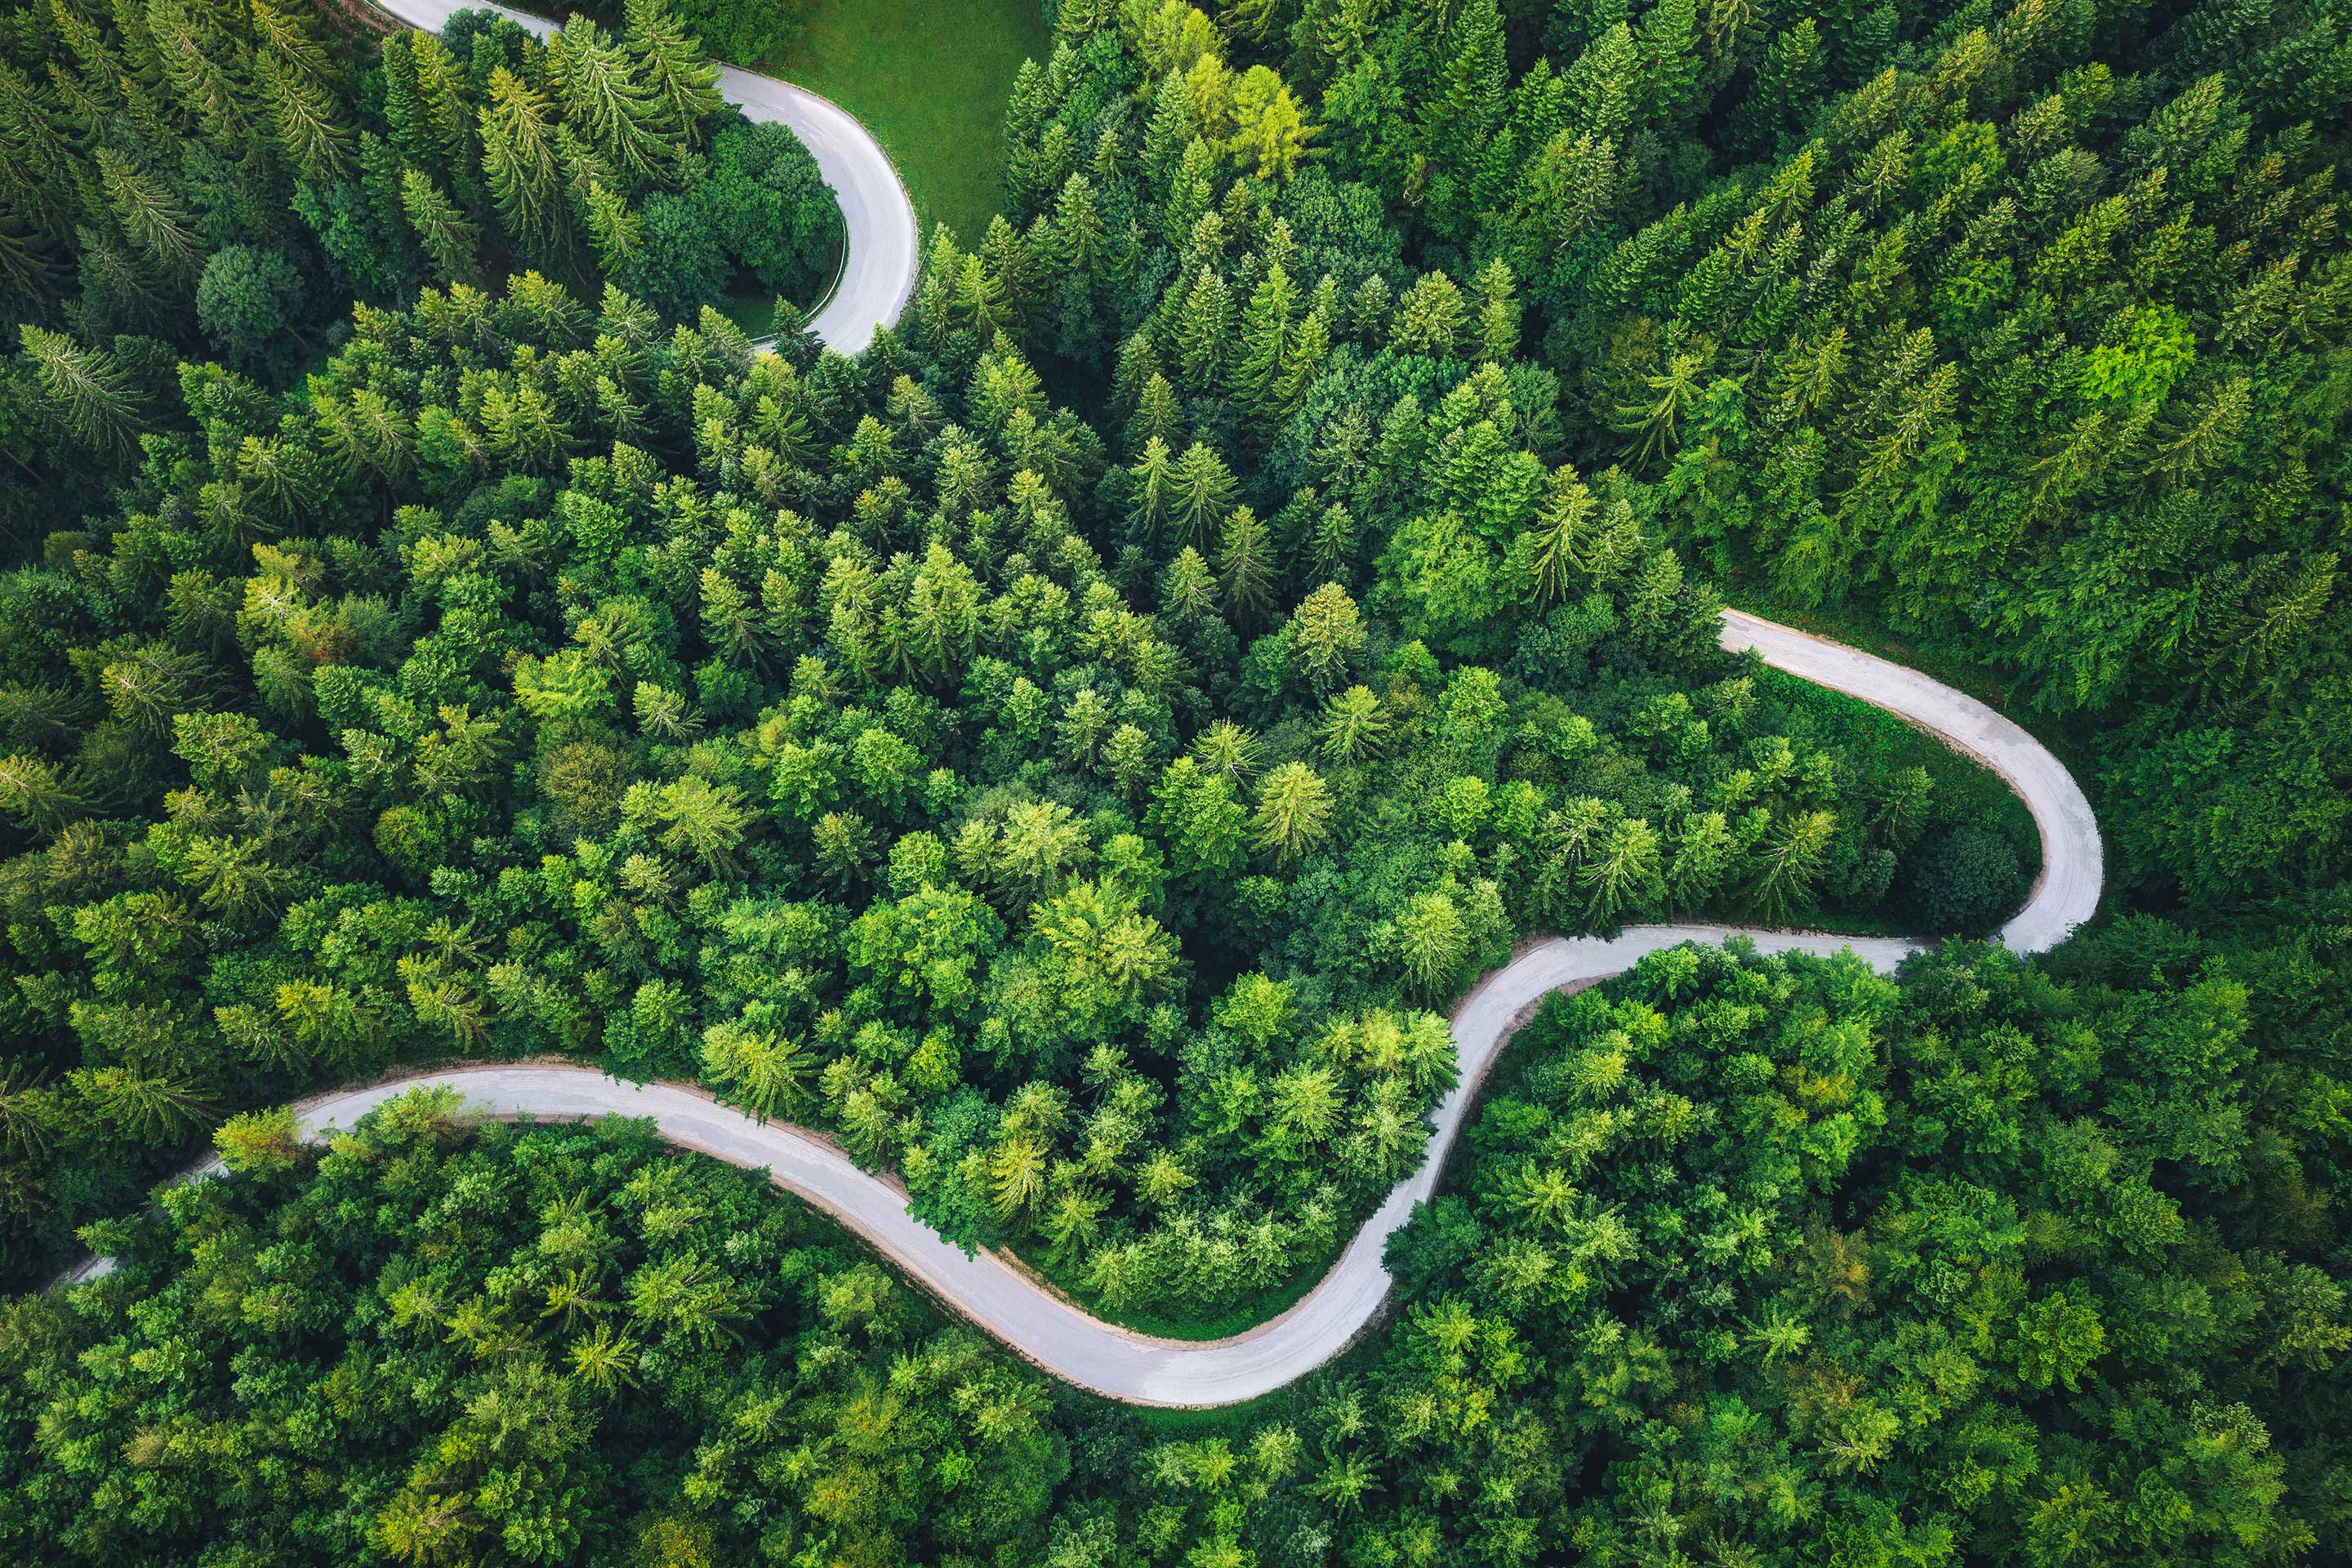 An overhead shot of a winding road in a forest as a metaphor for considering investment goals